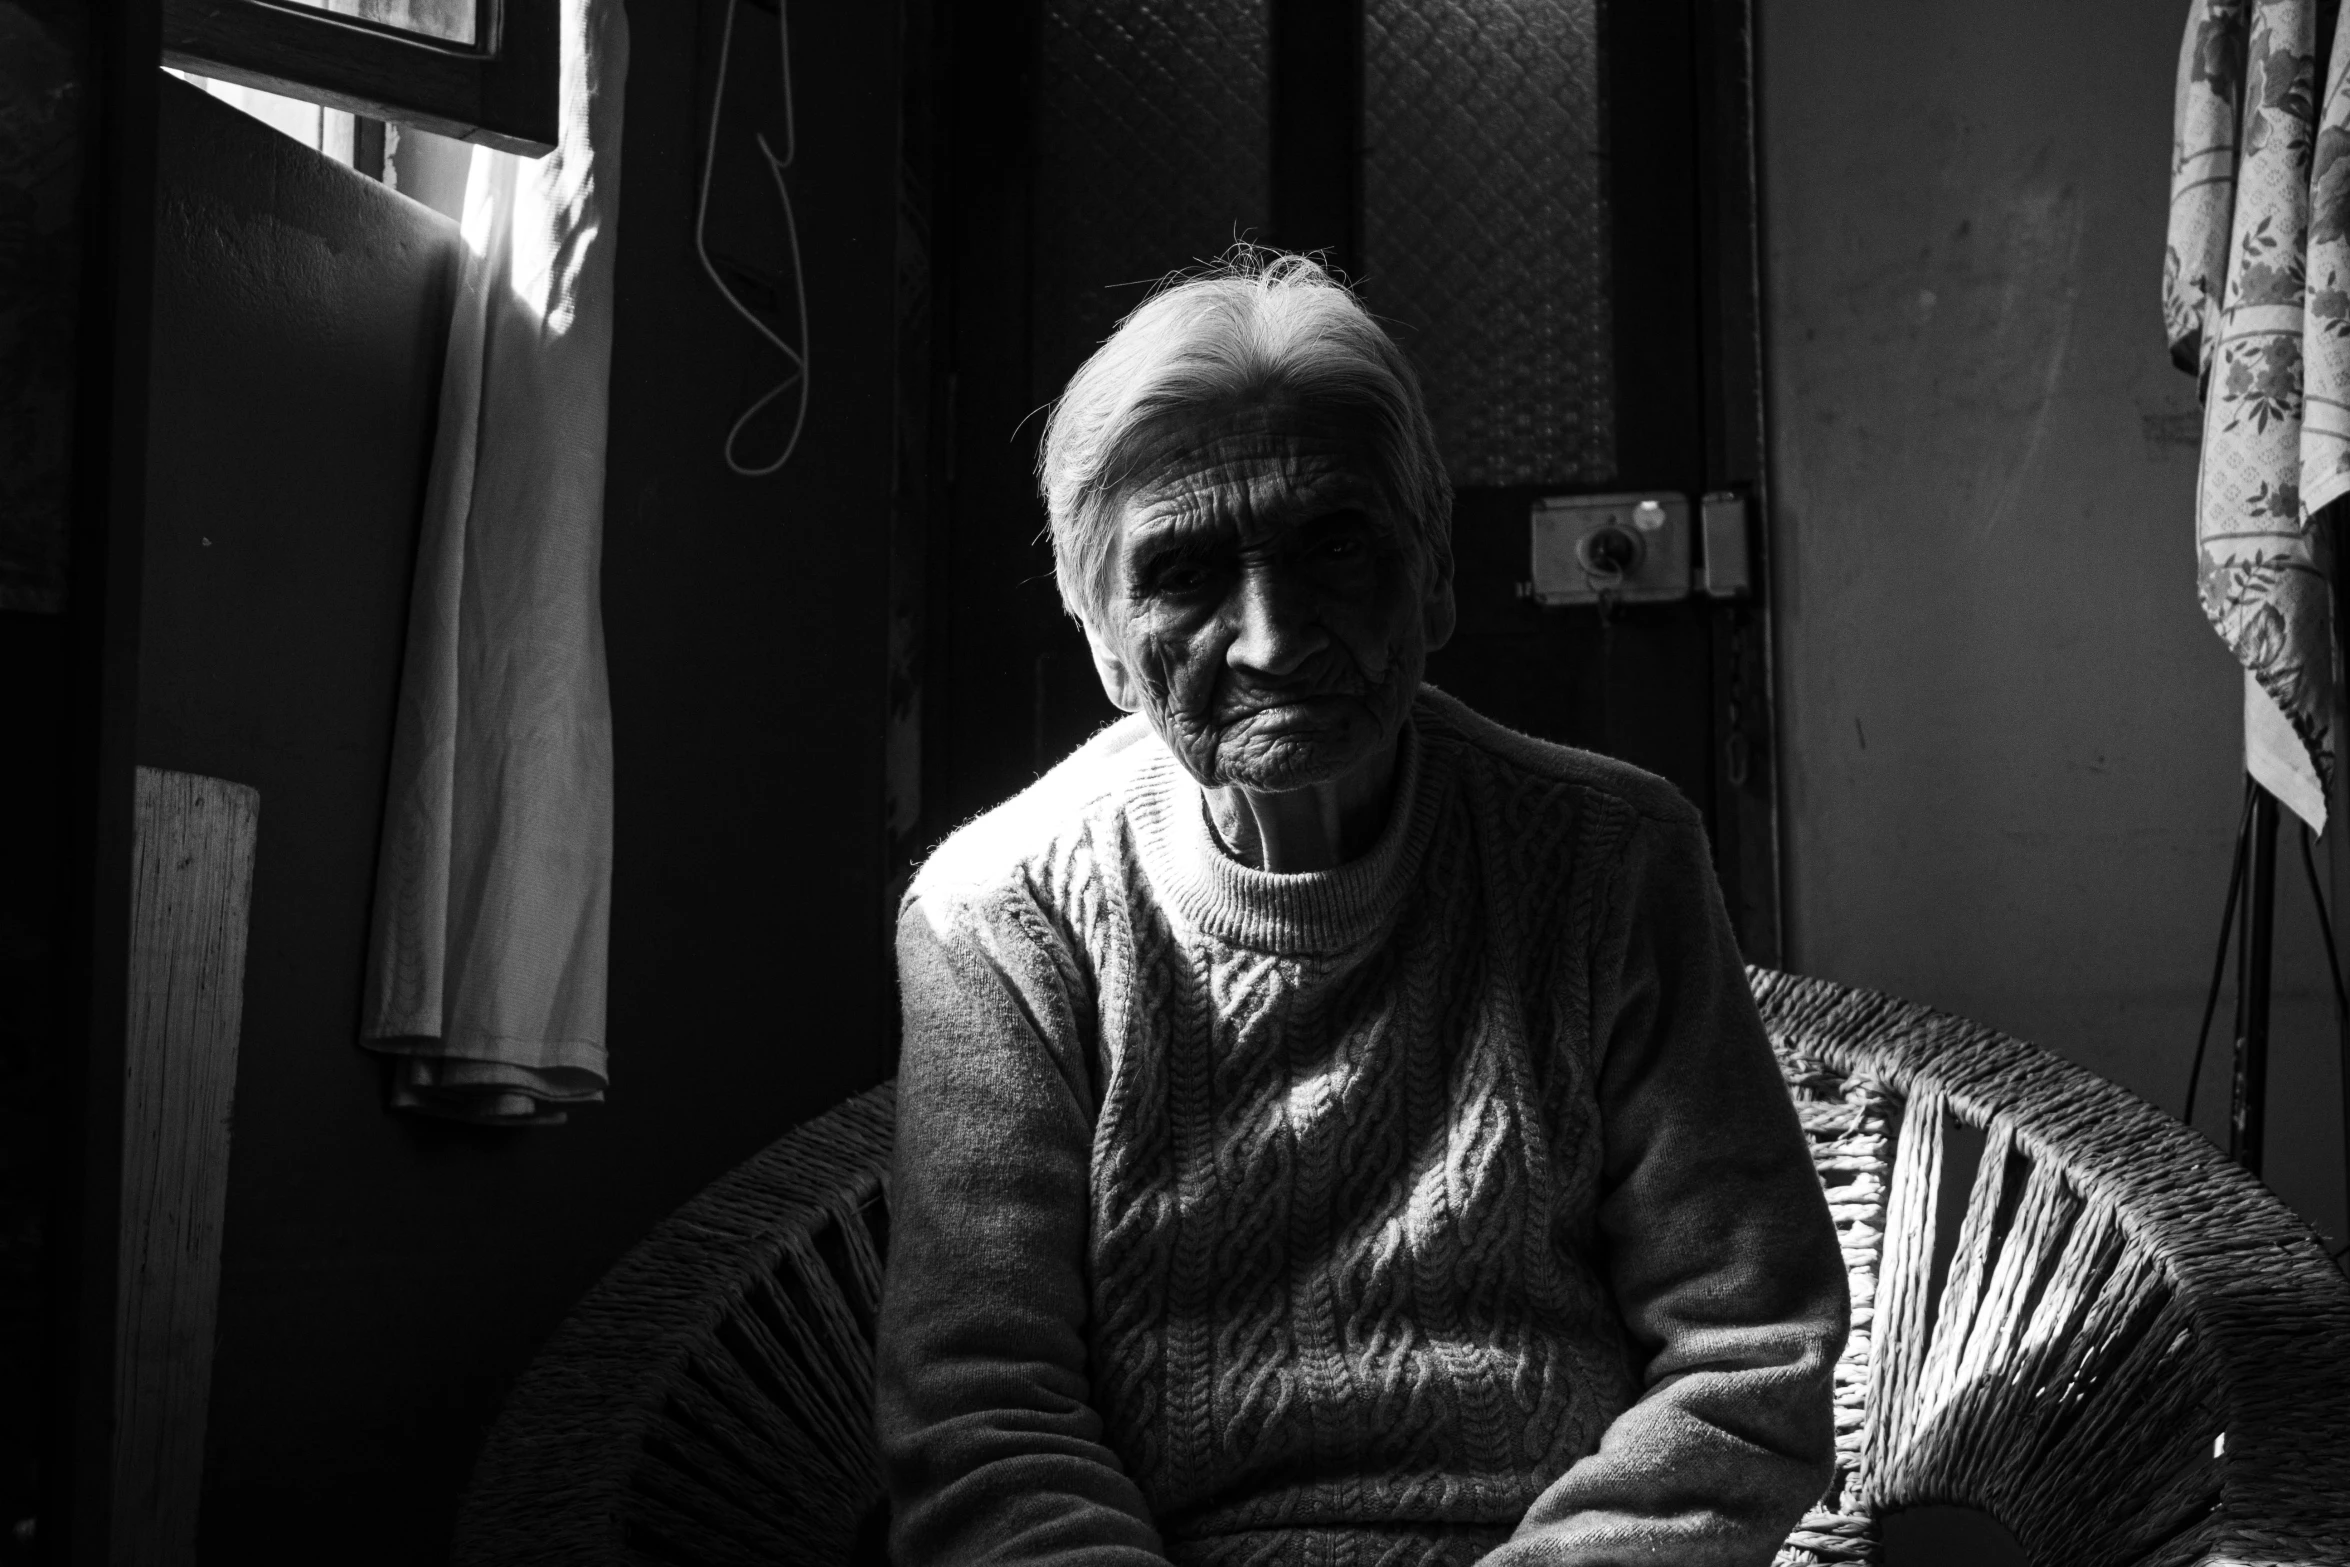 an elderly person sits inside a room by himself